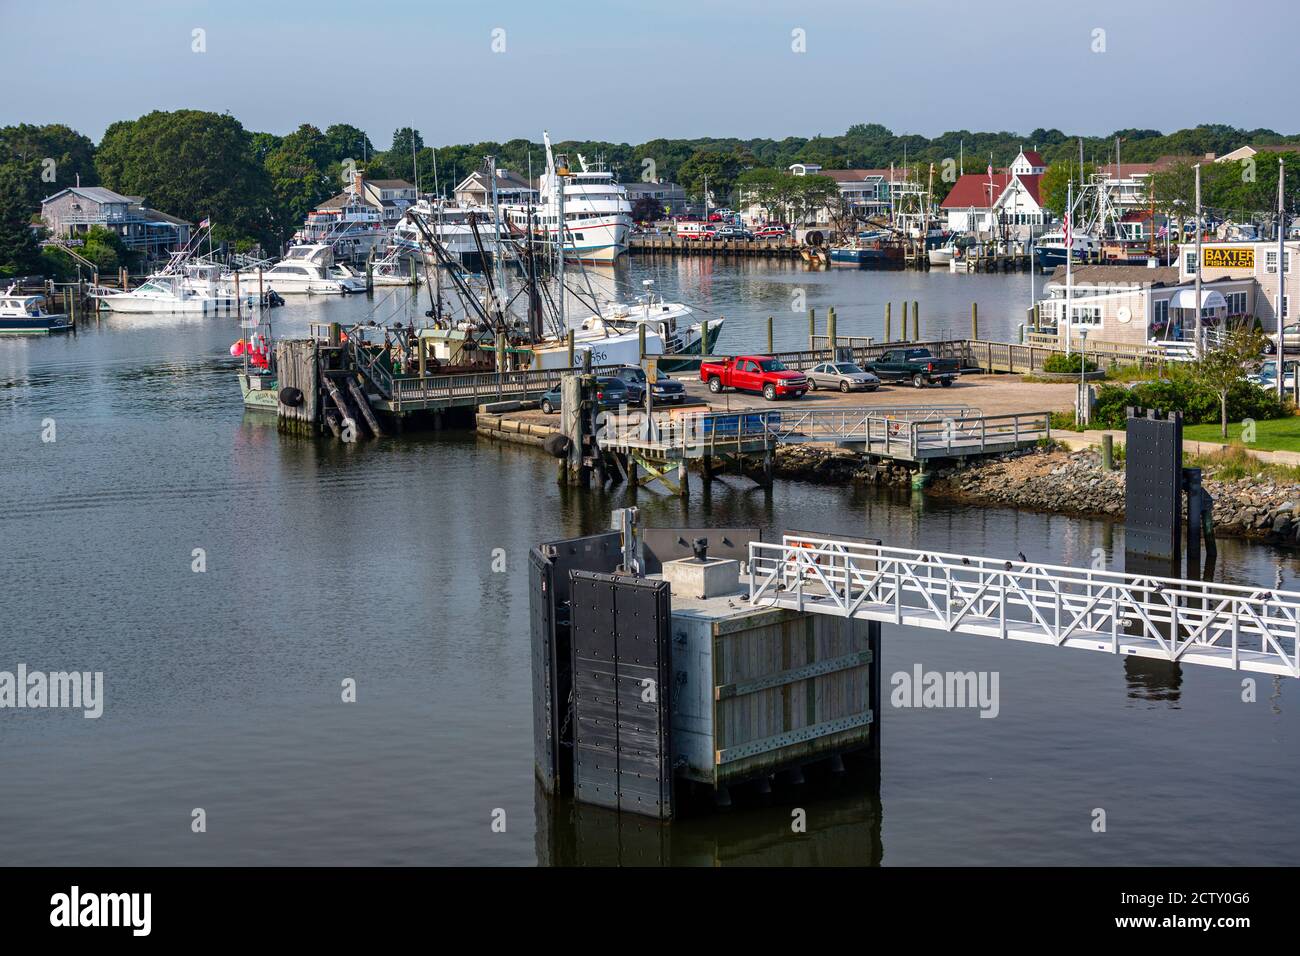 View from ferry to Nantucket, Hyannis, Barnstable, Cape Cod peninsula, Massachusetts, USA Stock Photo